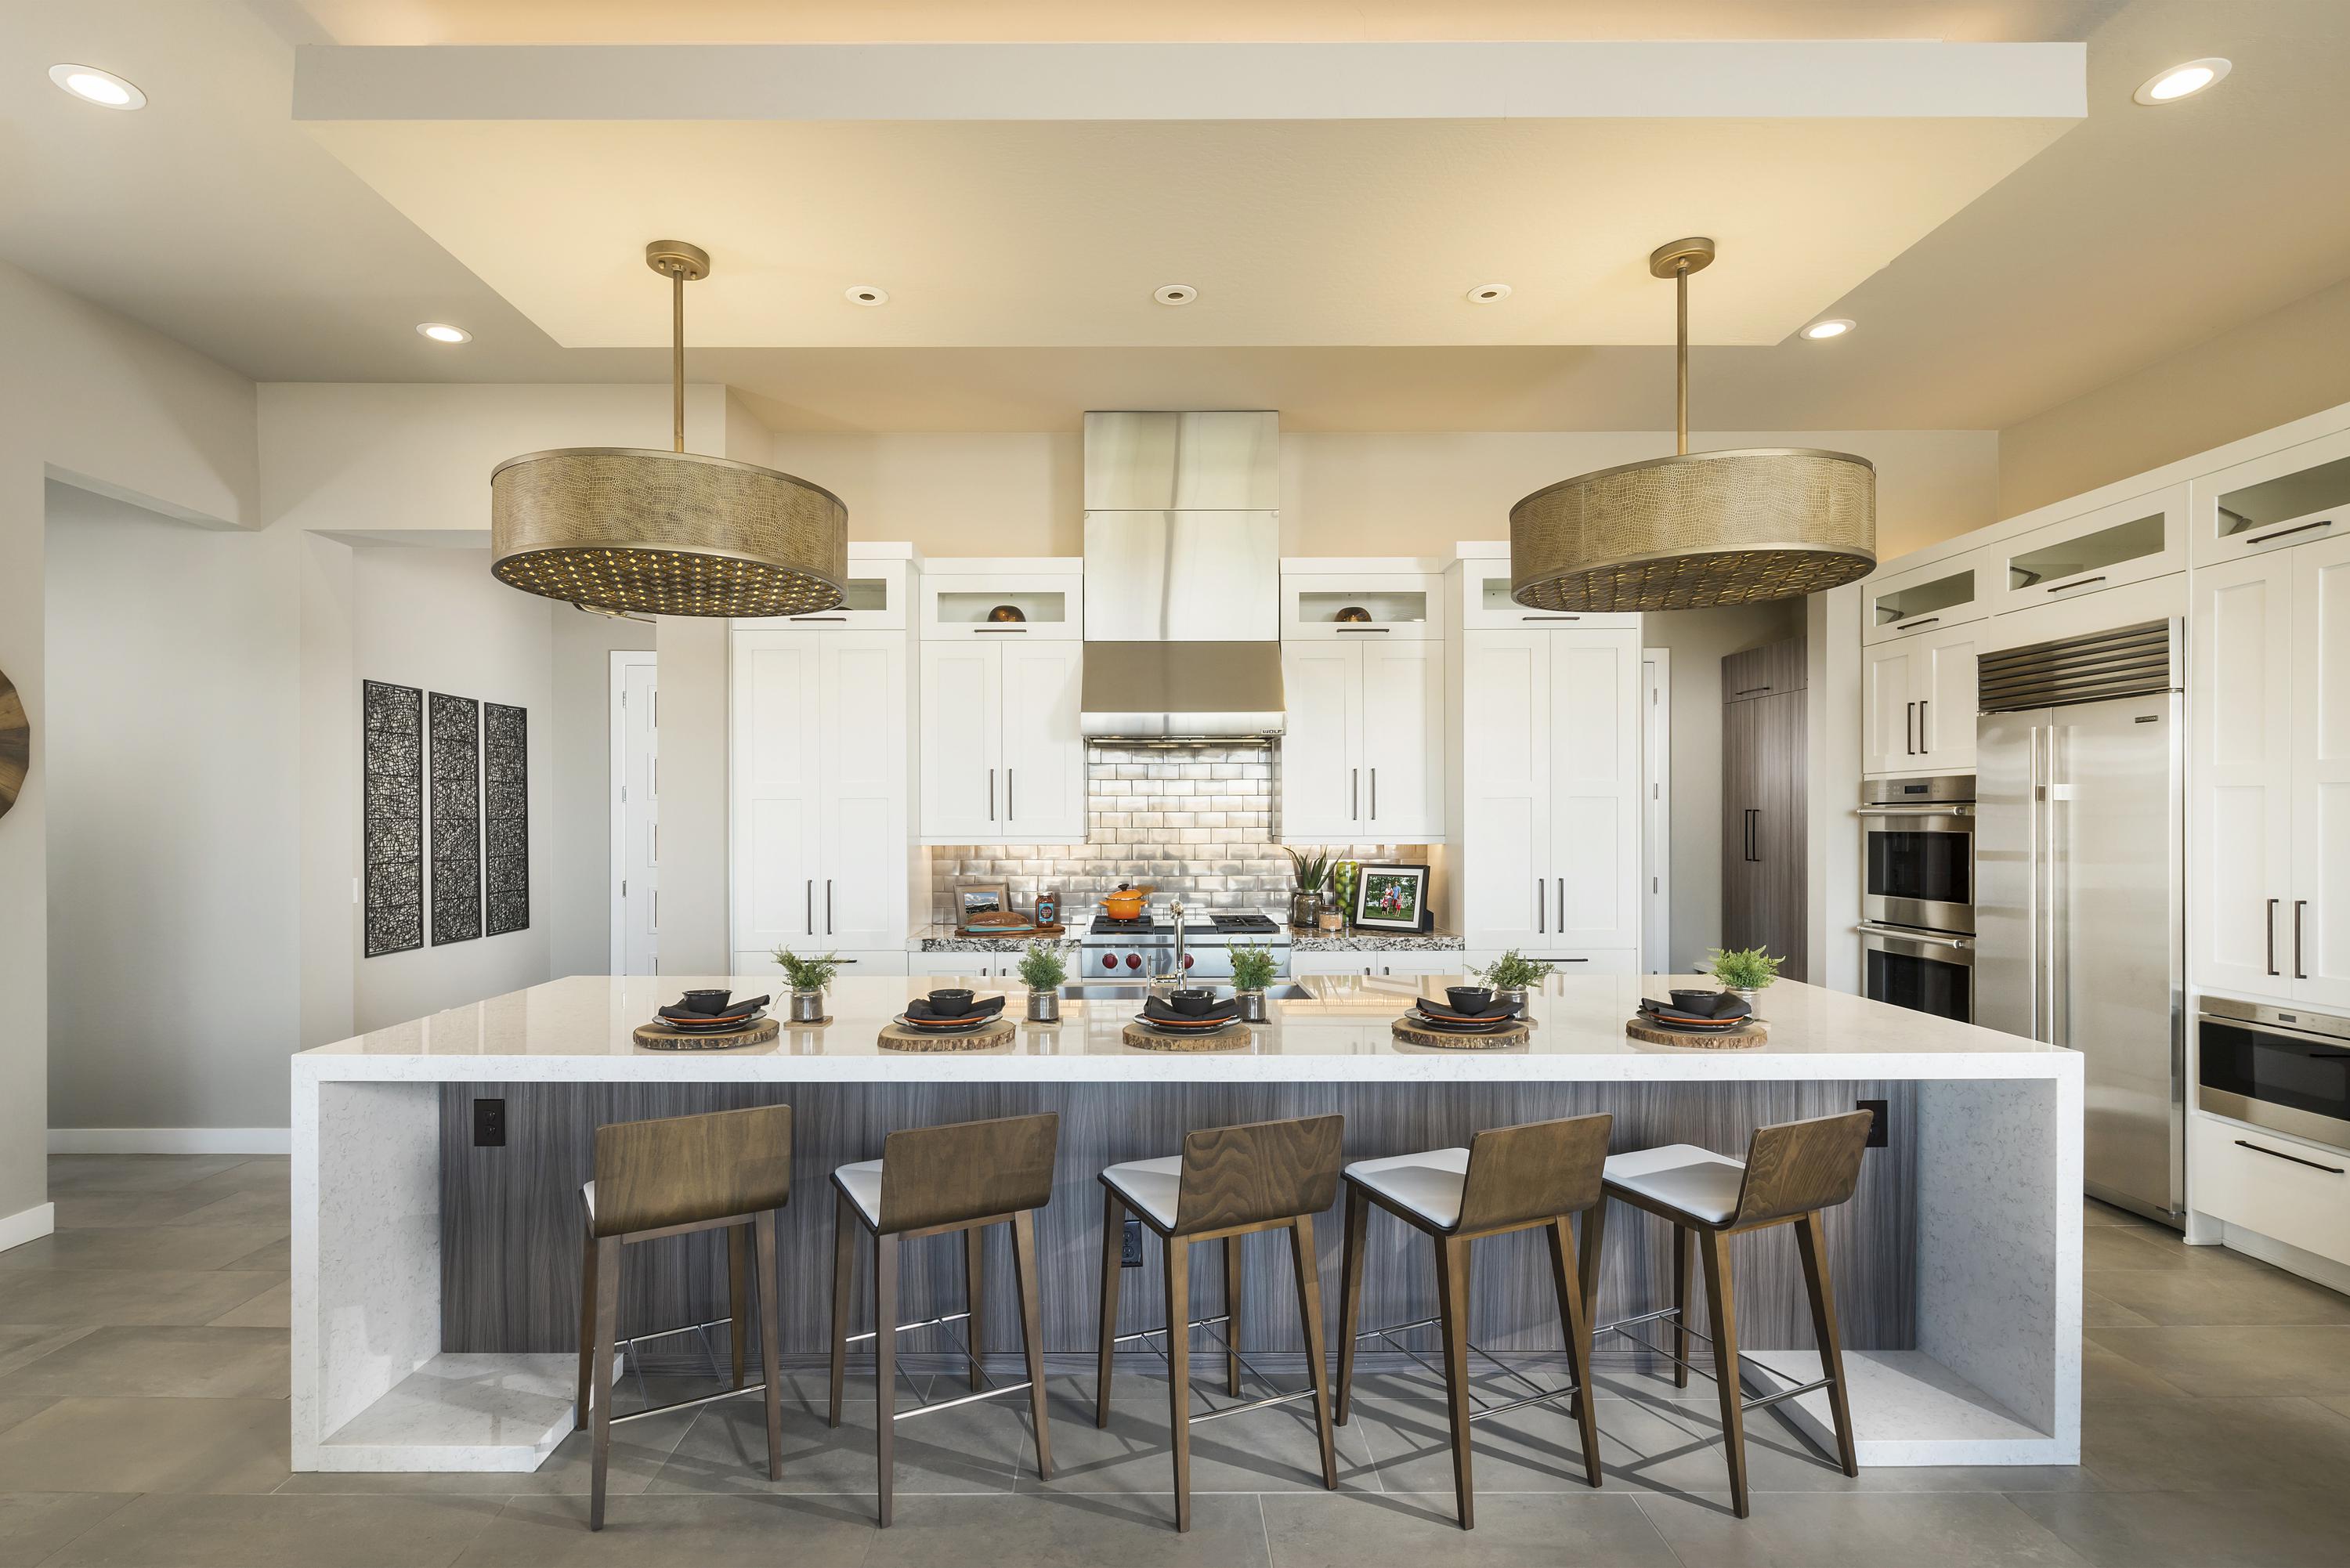 Open-concept kitchen with tremendous island and matching pendant fixtures.